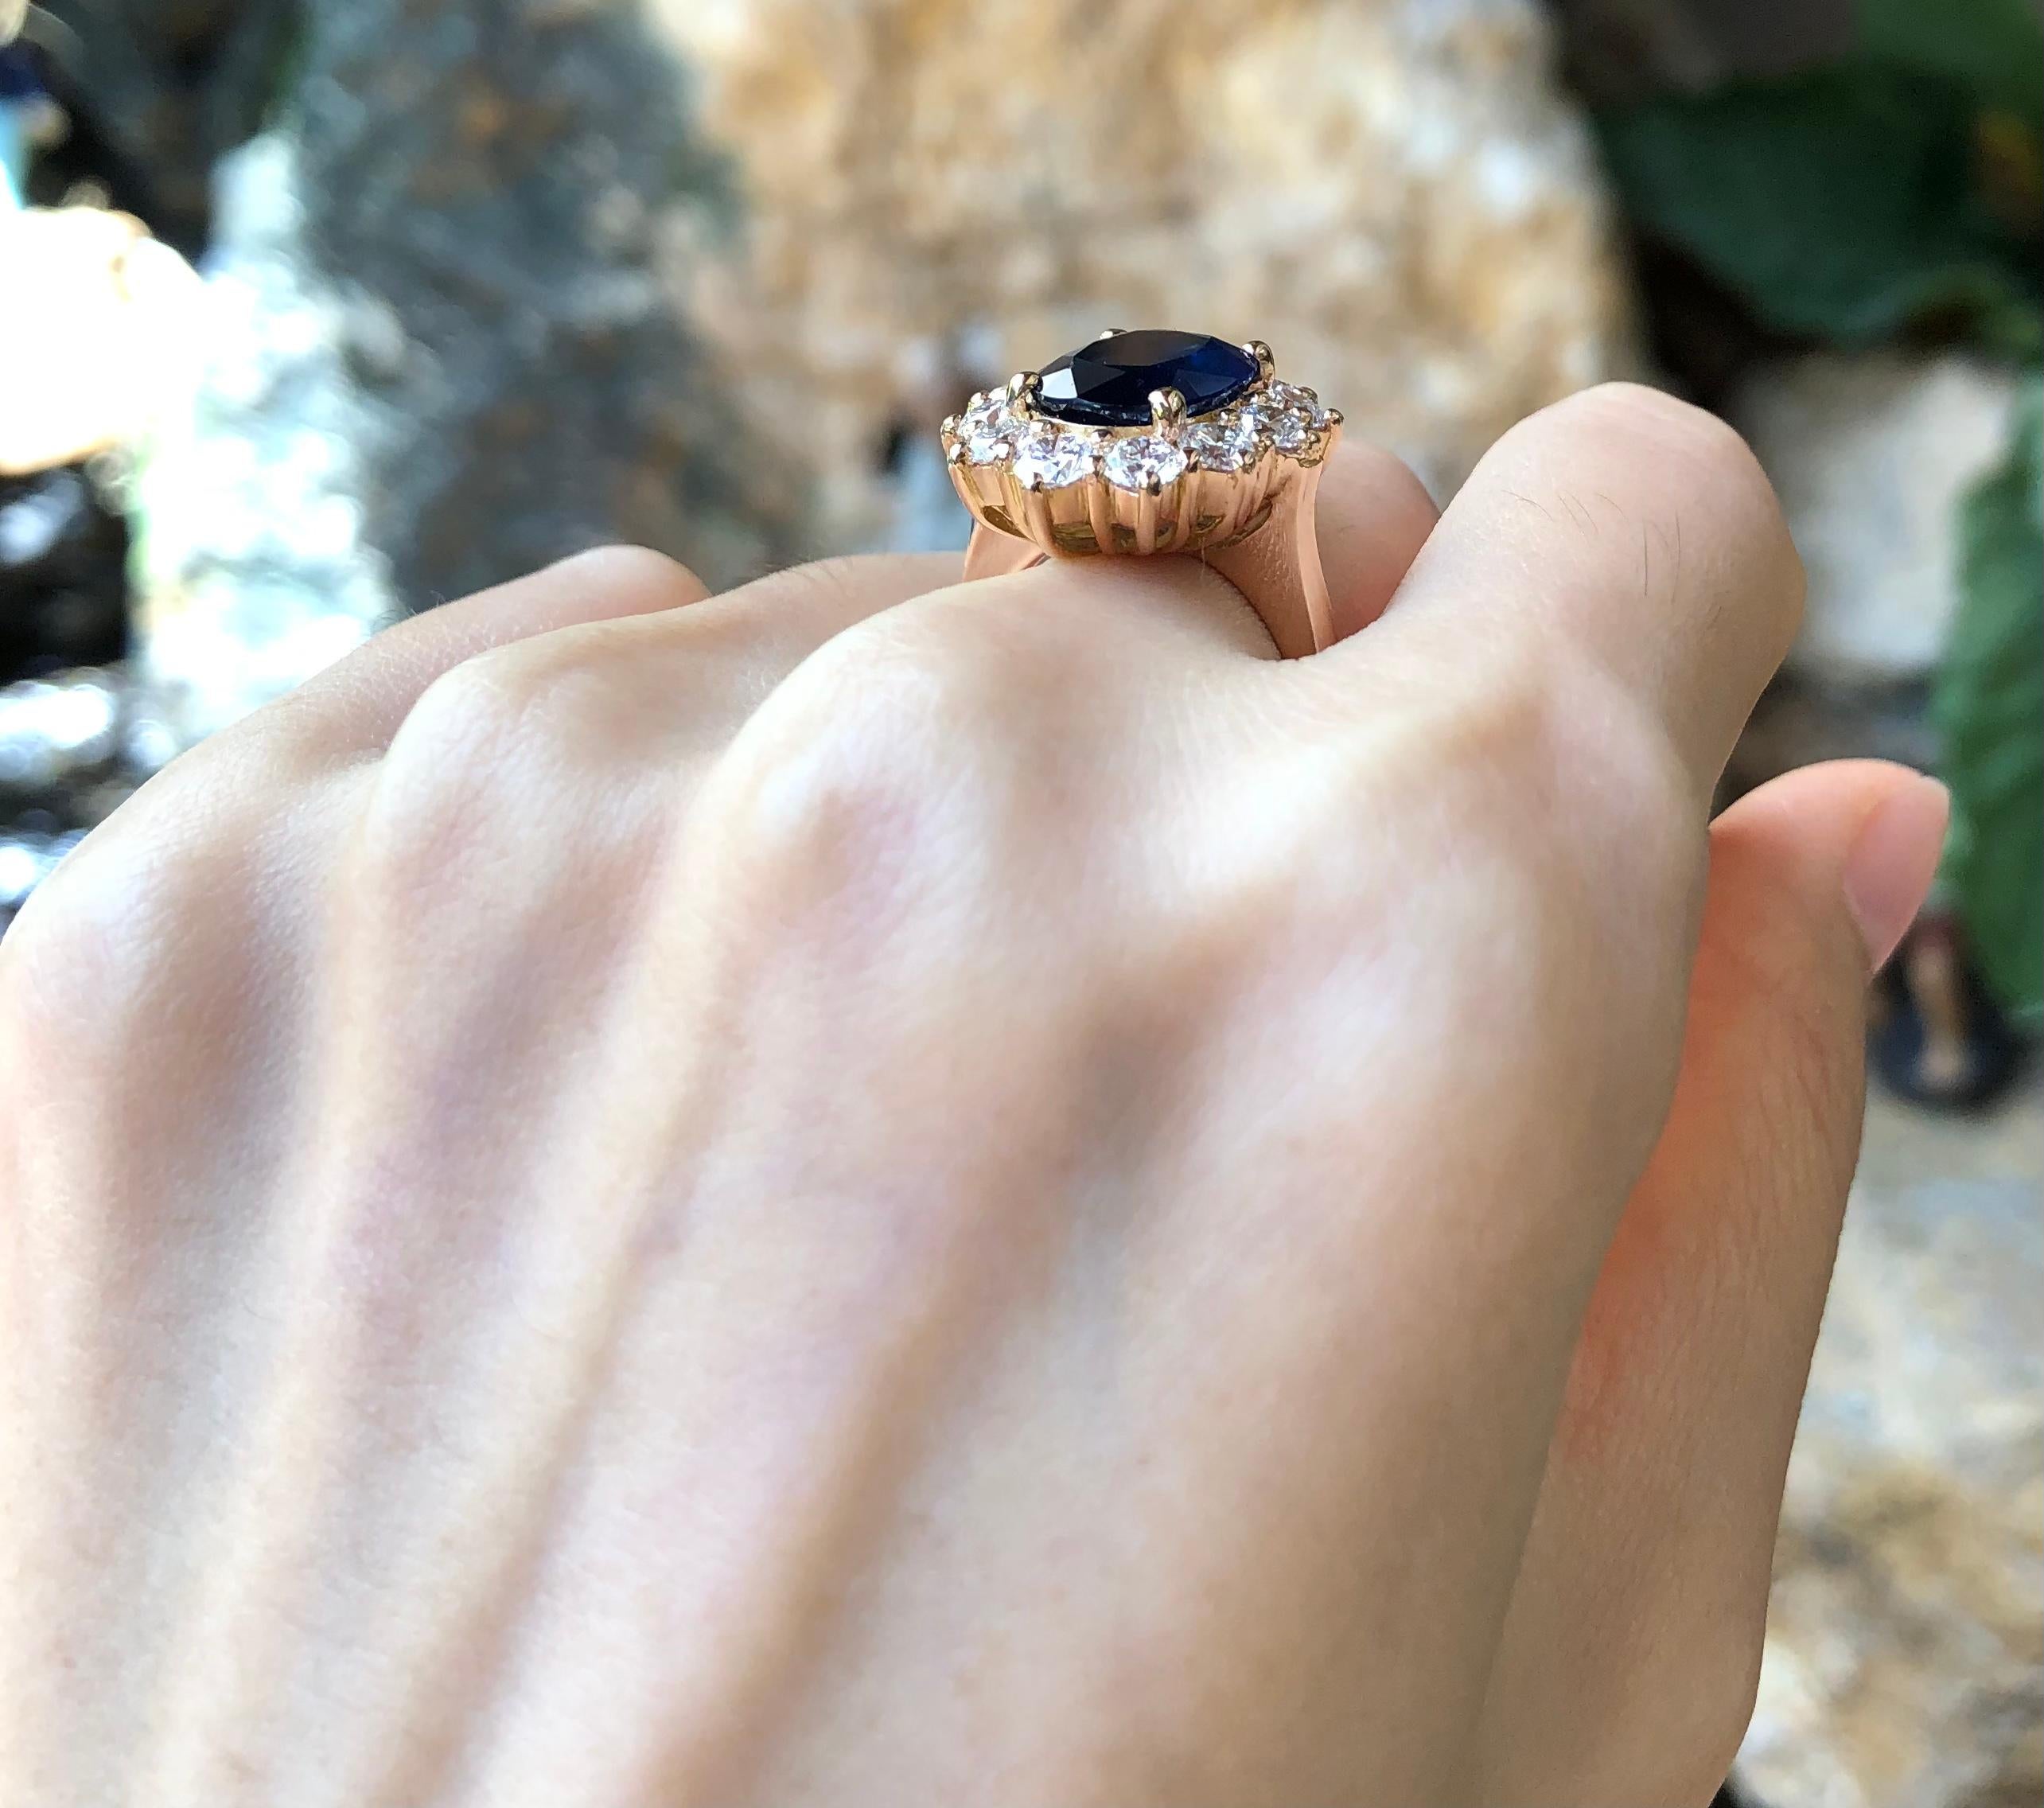 Blue Sapphire 5.19 carats with Diamond 2.28 carats Ring set in 18 Karat Rose Gold Settings

Width:  1.8 cm 
Length:  2.1 cm
Ring Size: 53
Total Weight: 12.24 grams

Blue Sapphire
Width:  0.9 cm 
Length:  1.3 cm

